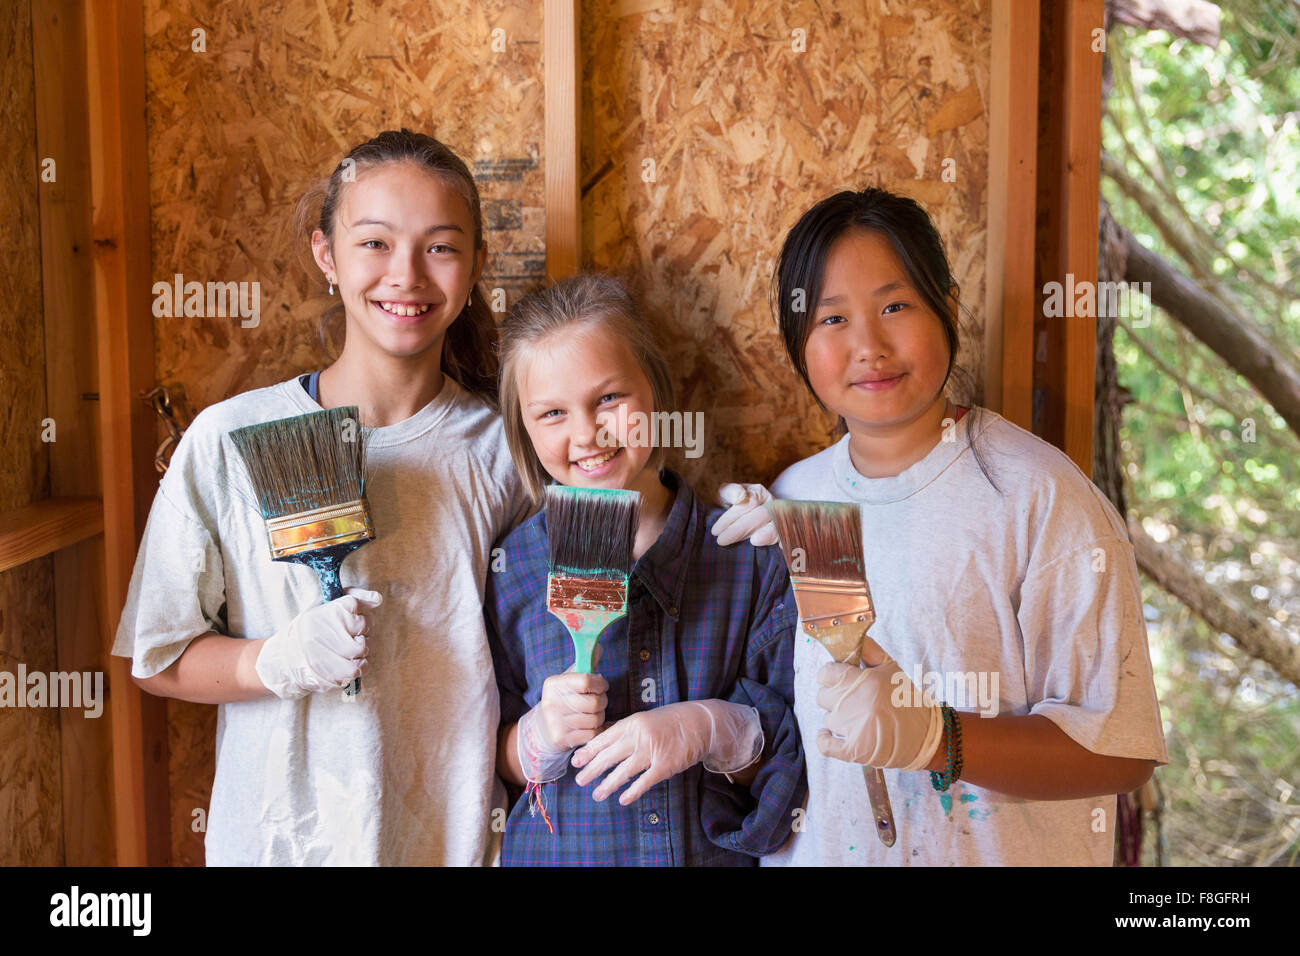 Smiling girls painting house Banque D'Images